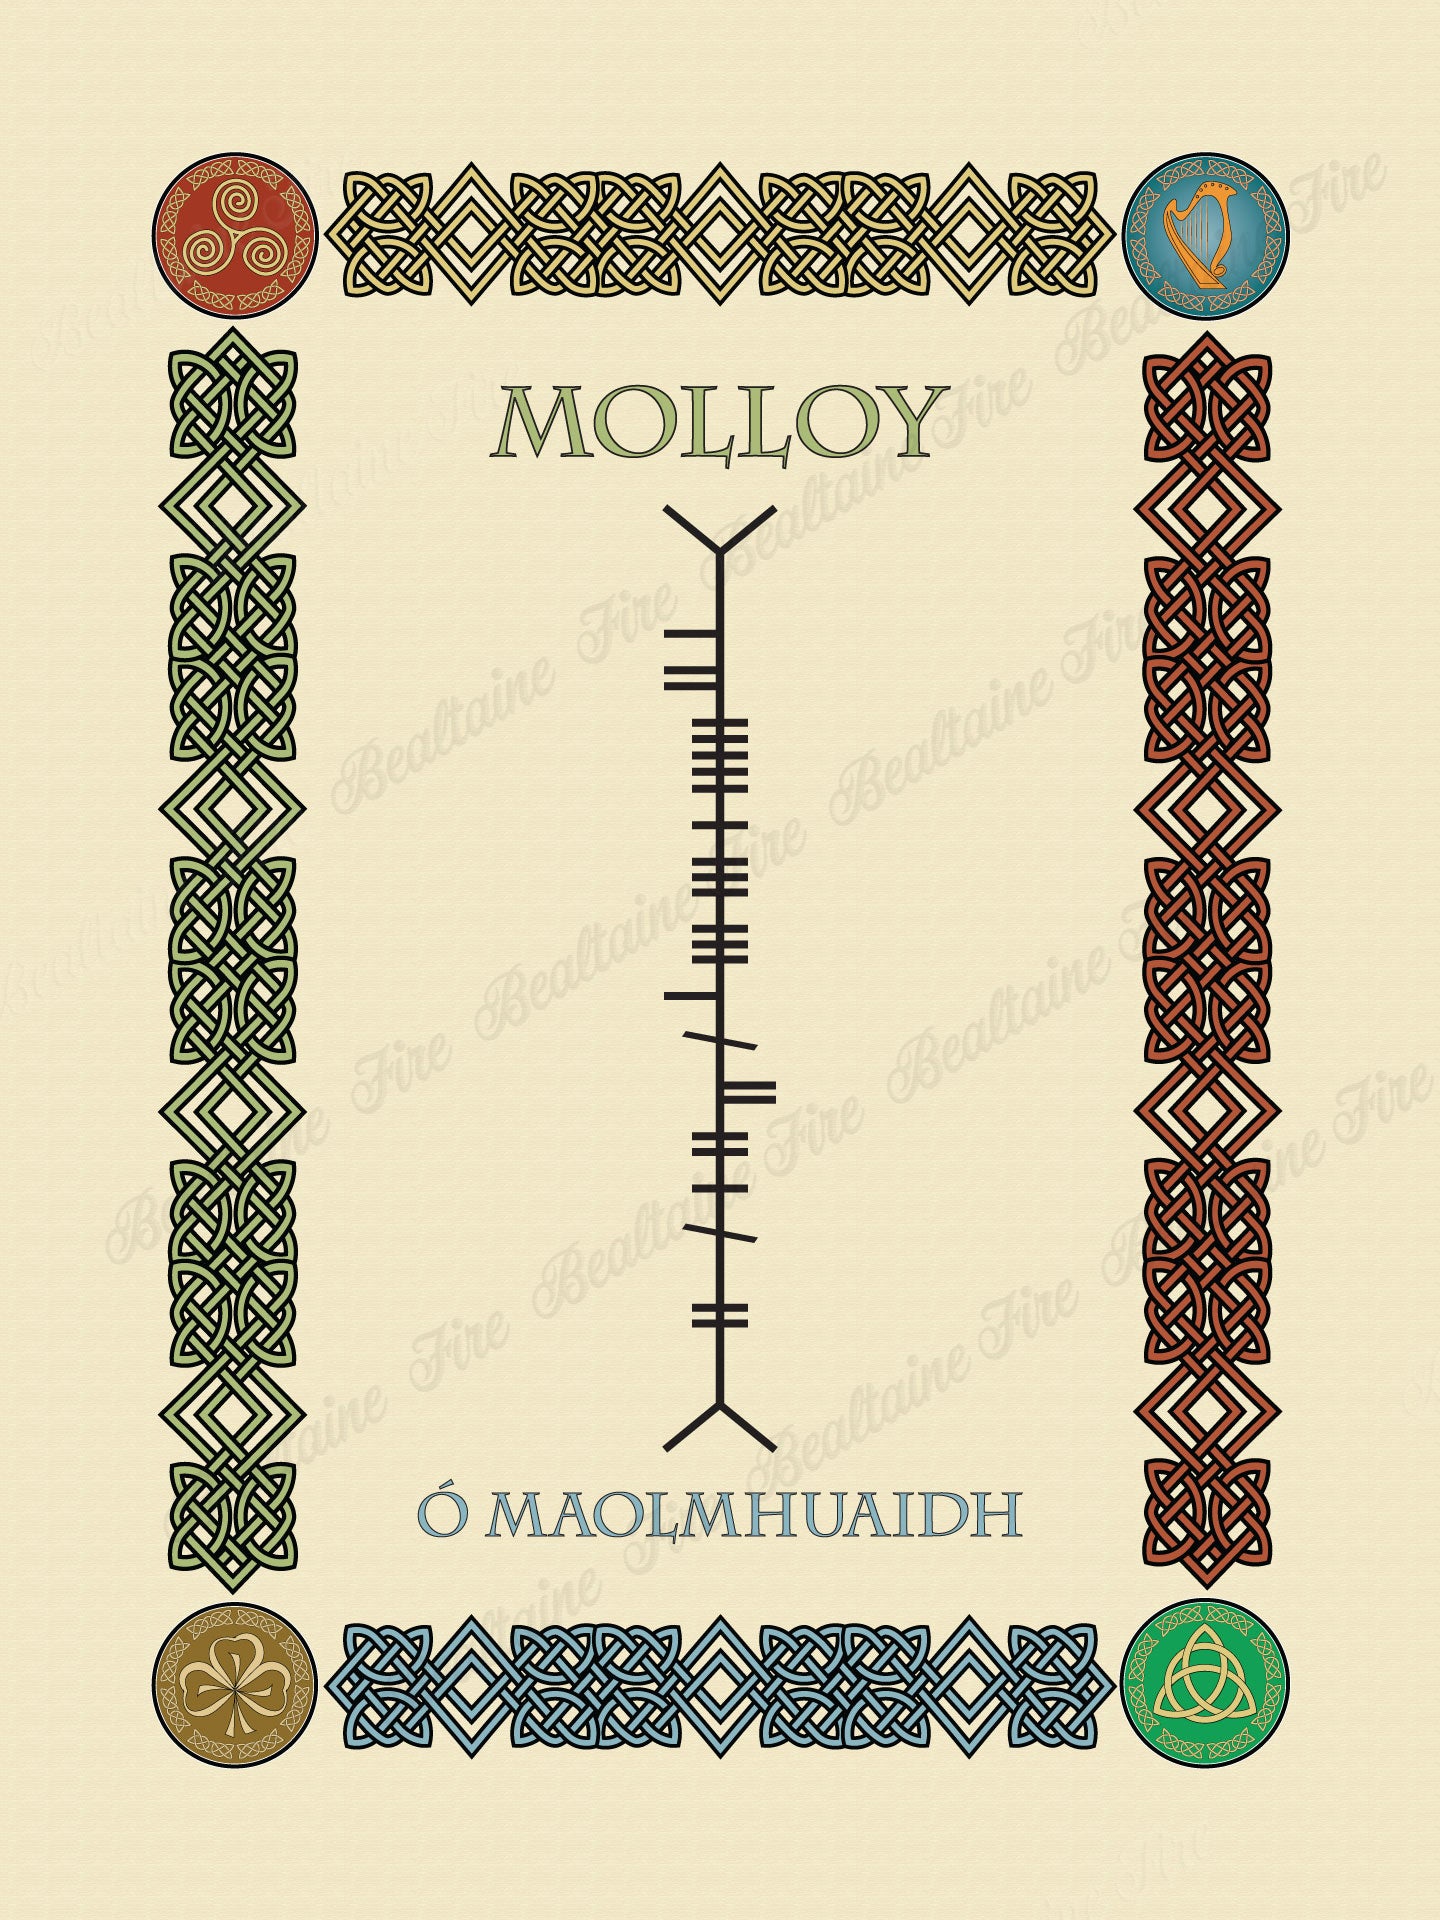 Molloy in Old Irish and Ogham - Premium luster unframed print